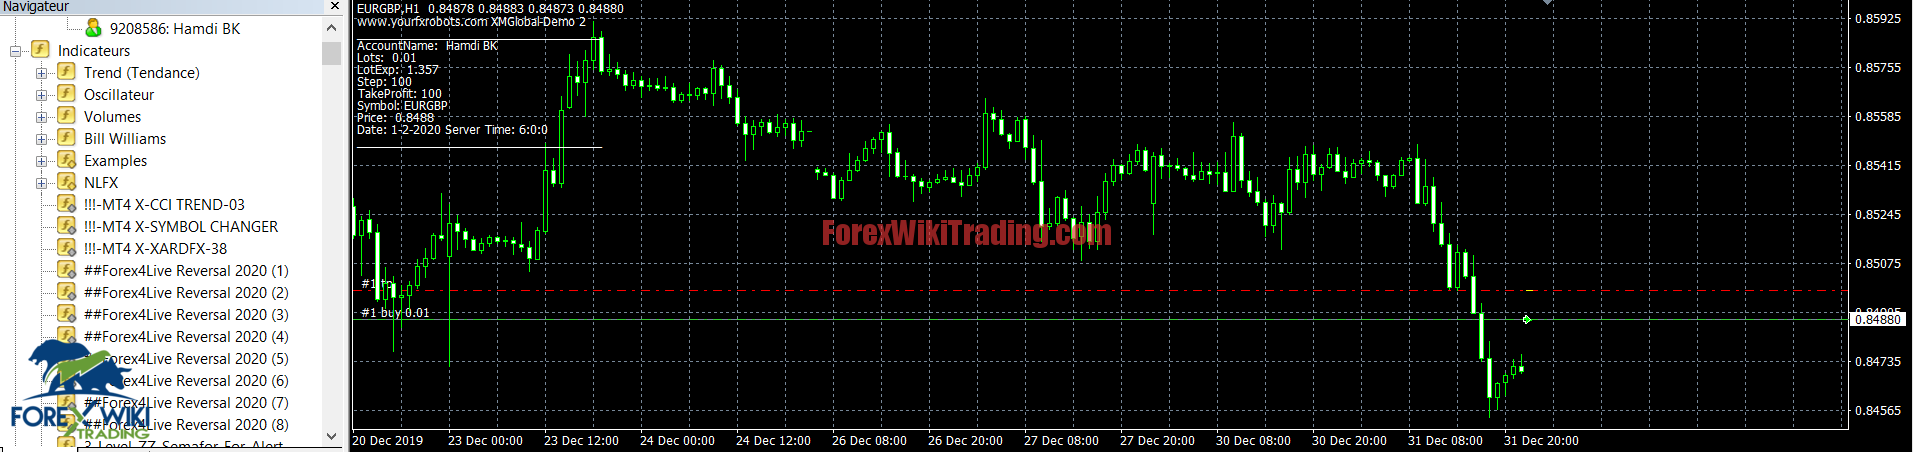 Forex gold lot size why is weather difficult to predict with 100% accuracy forex